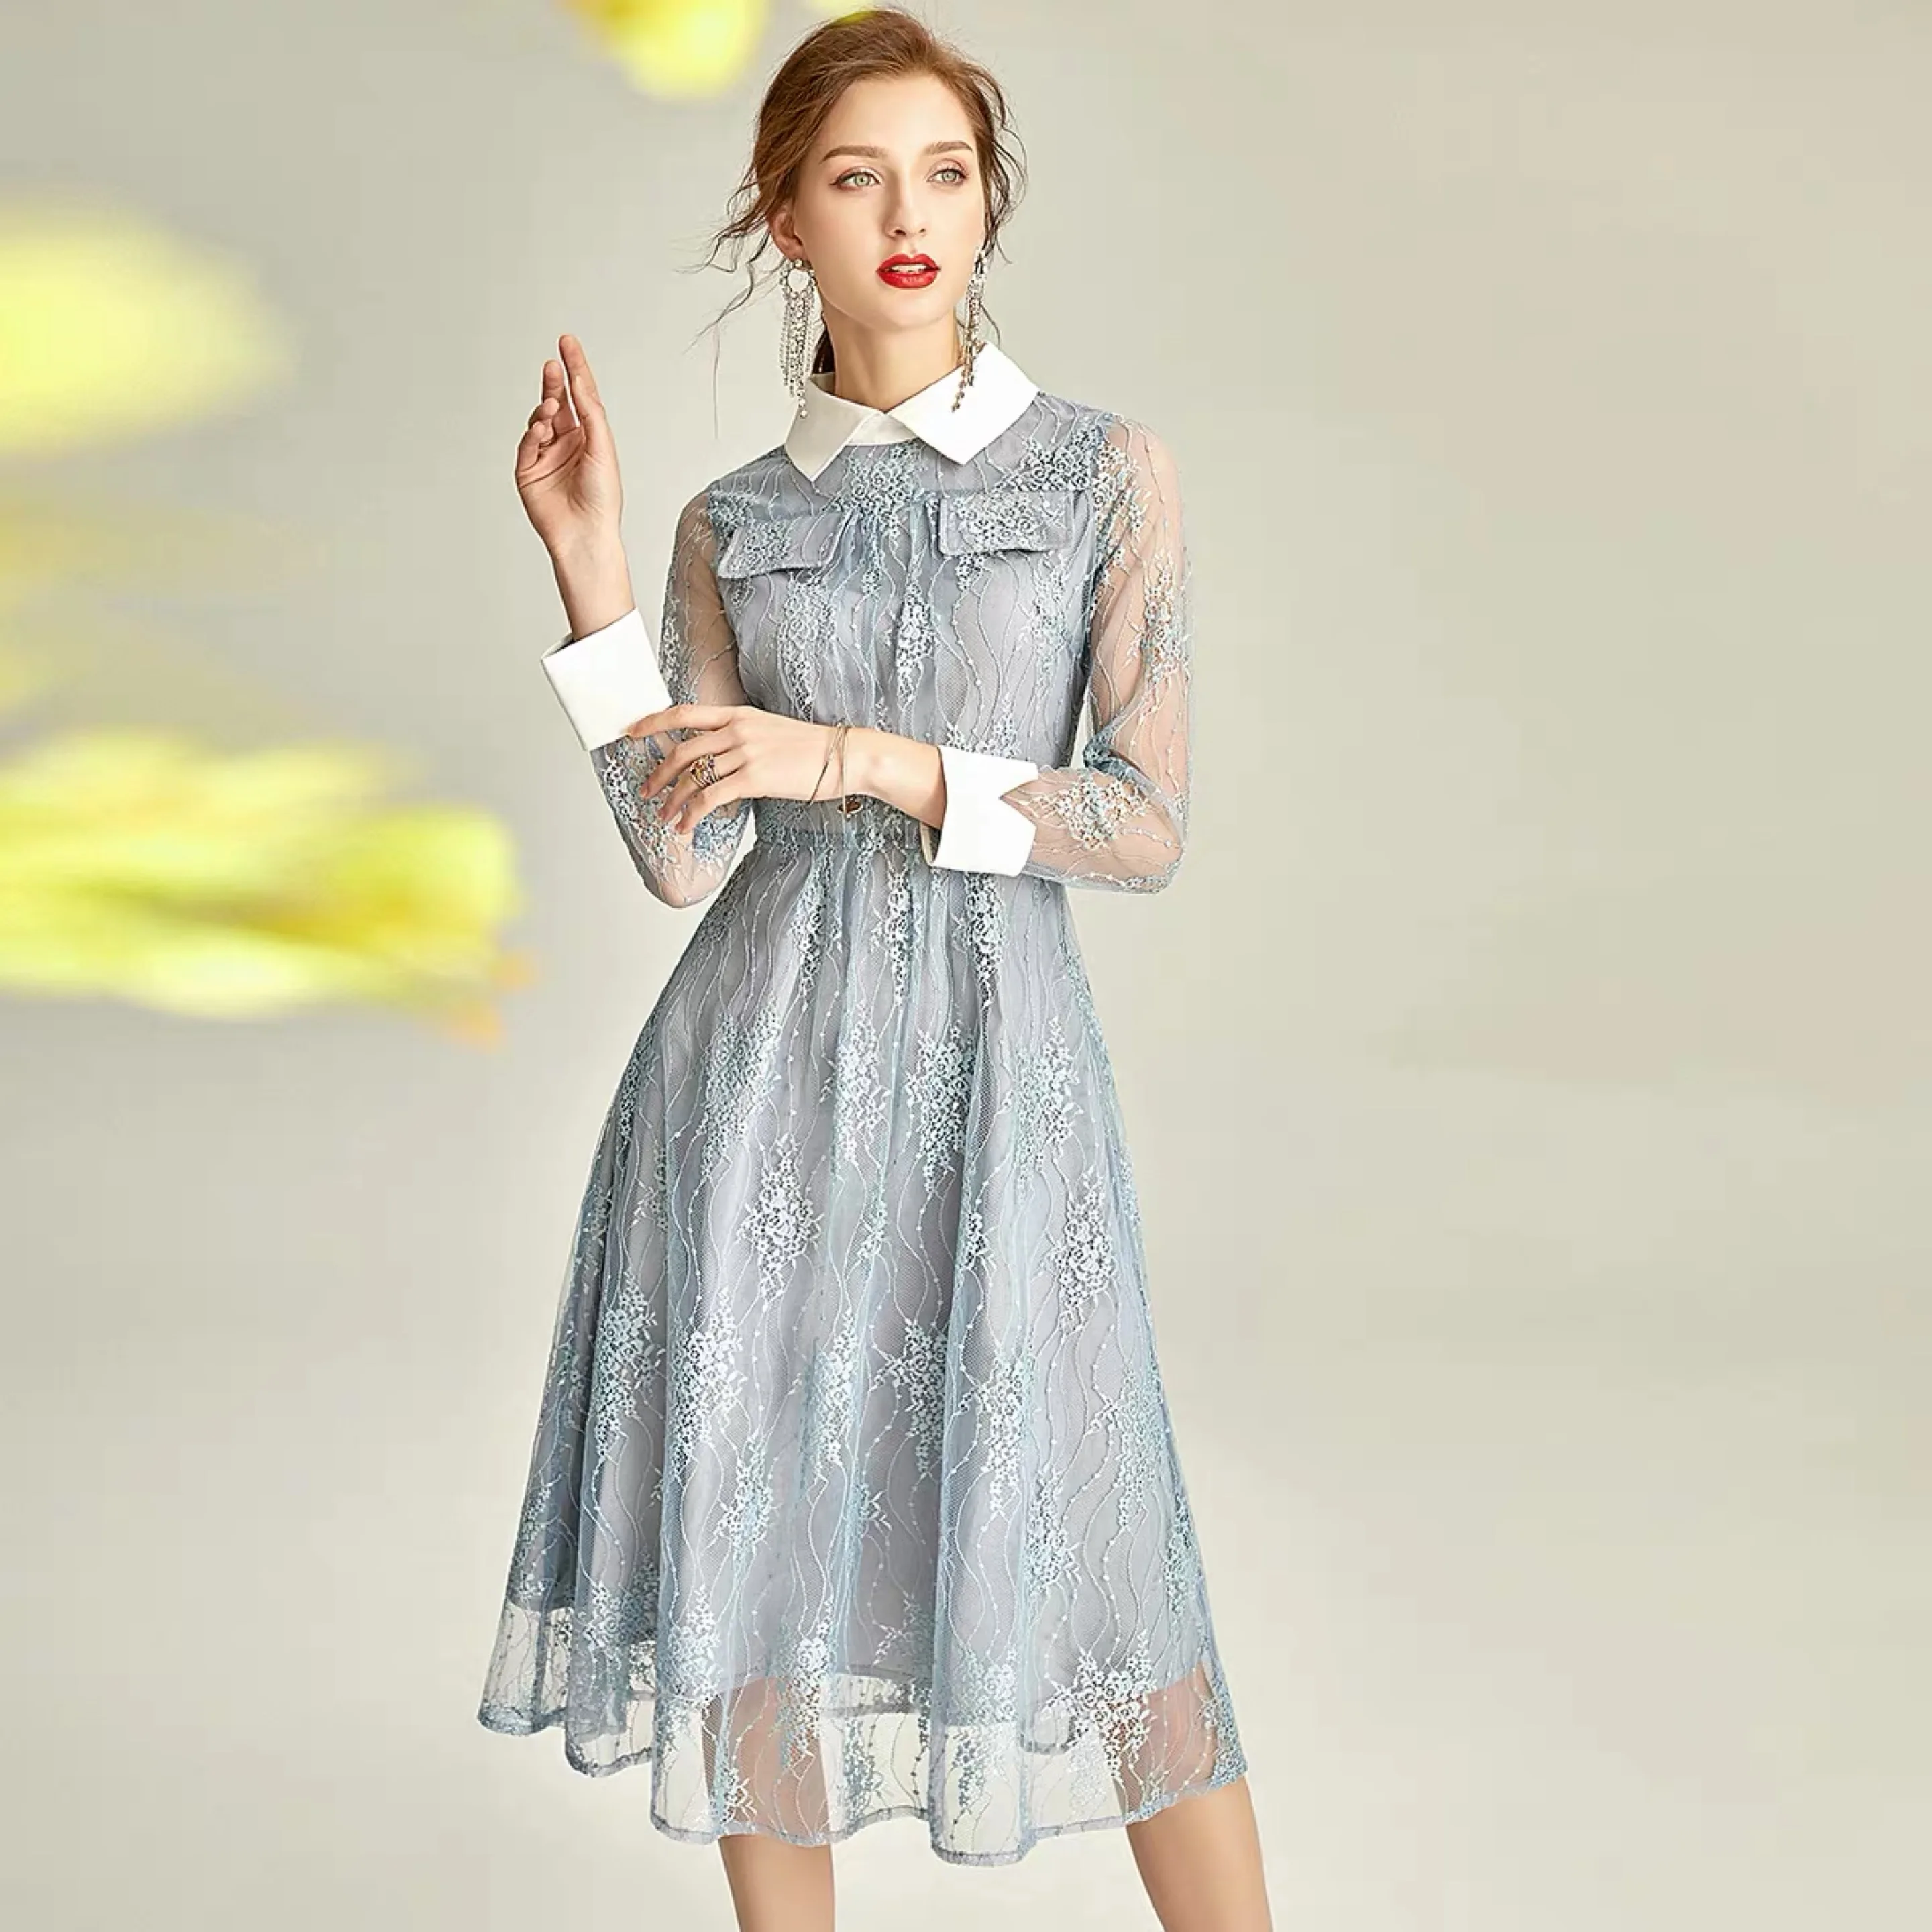 

New Women's Cocktail Dresses Long Sleeve High Qualit Fashion Party Work Casual Gown Embroidery Commuter Wedding Guest Dress 2021